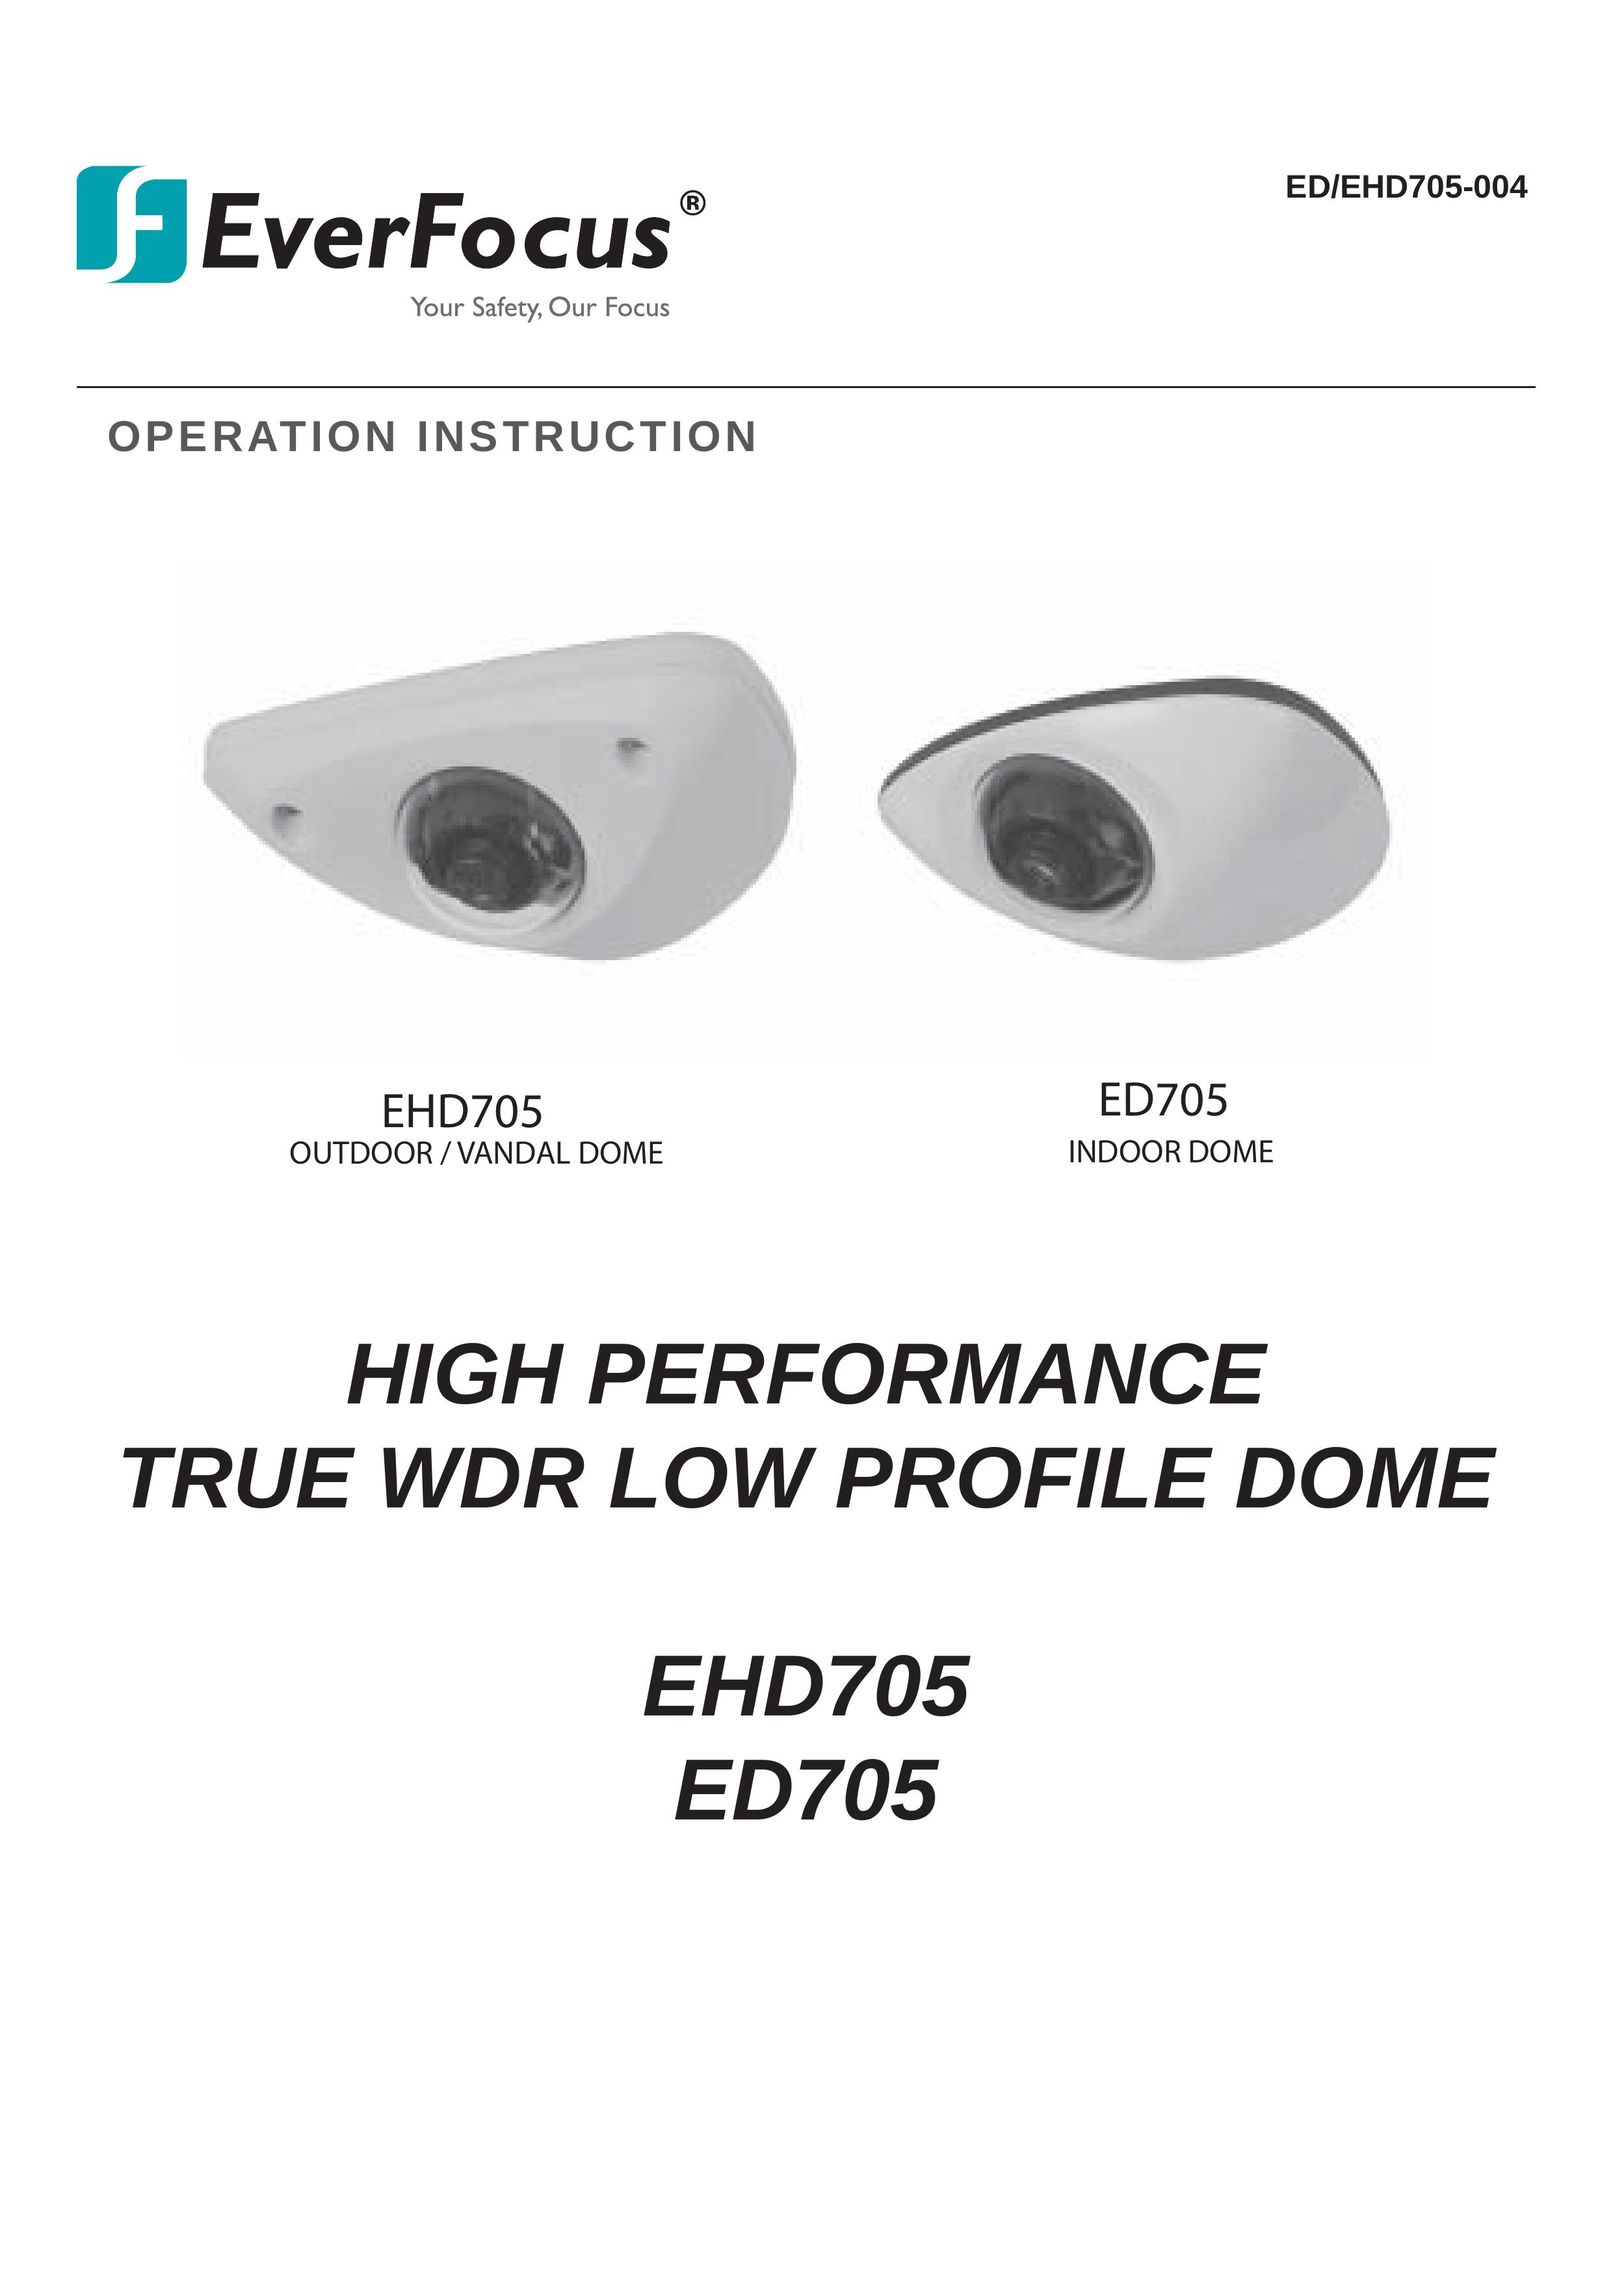 EverFocus EHD705 Home Security System User Manual